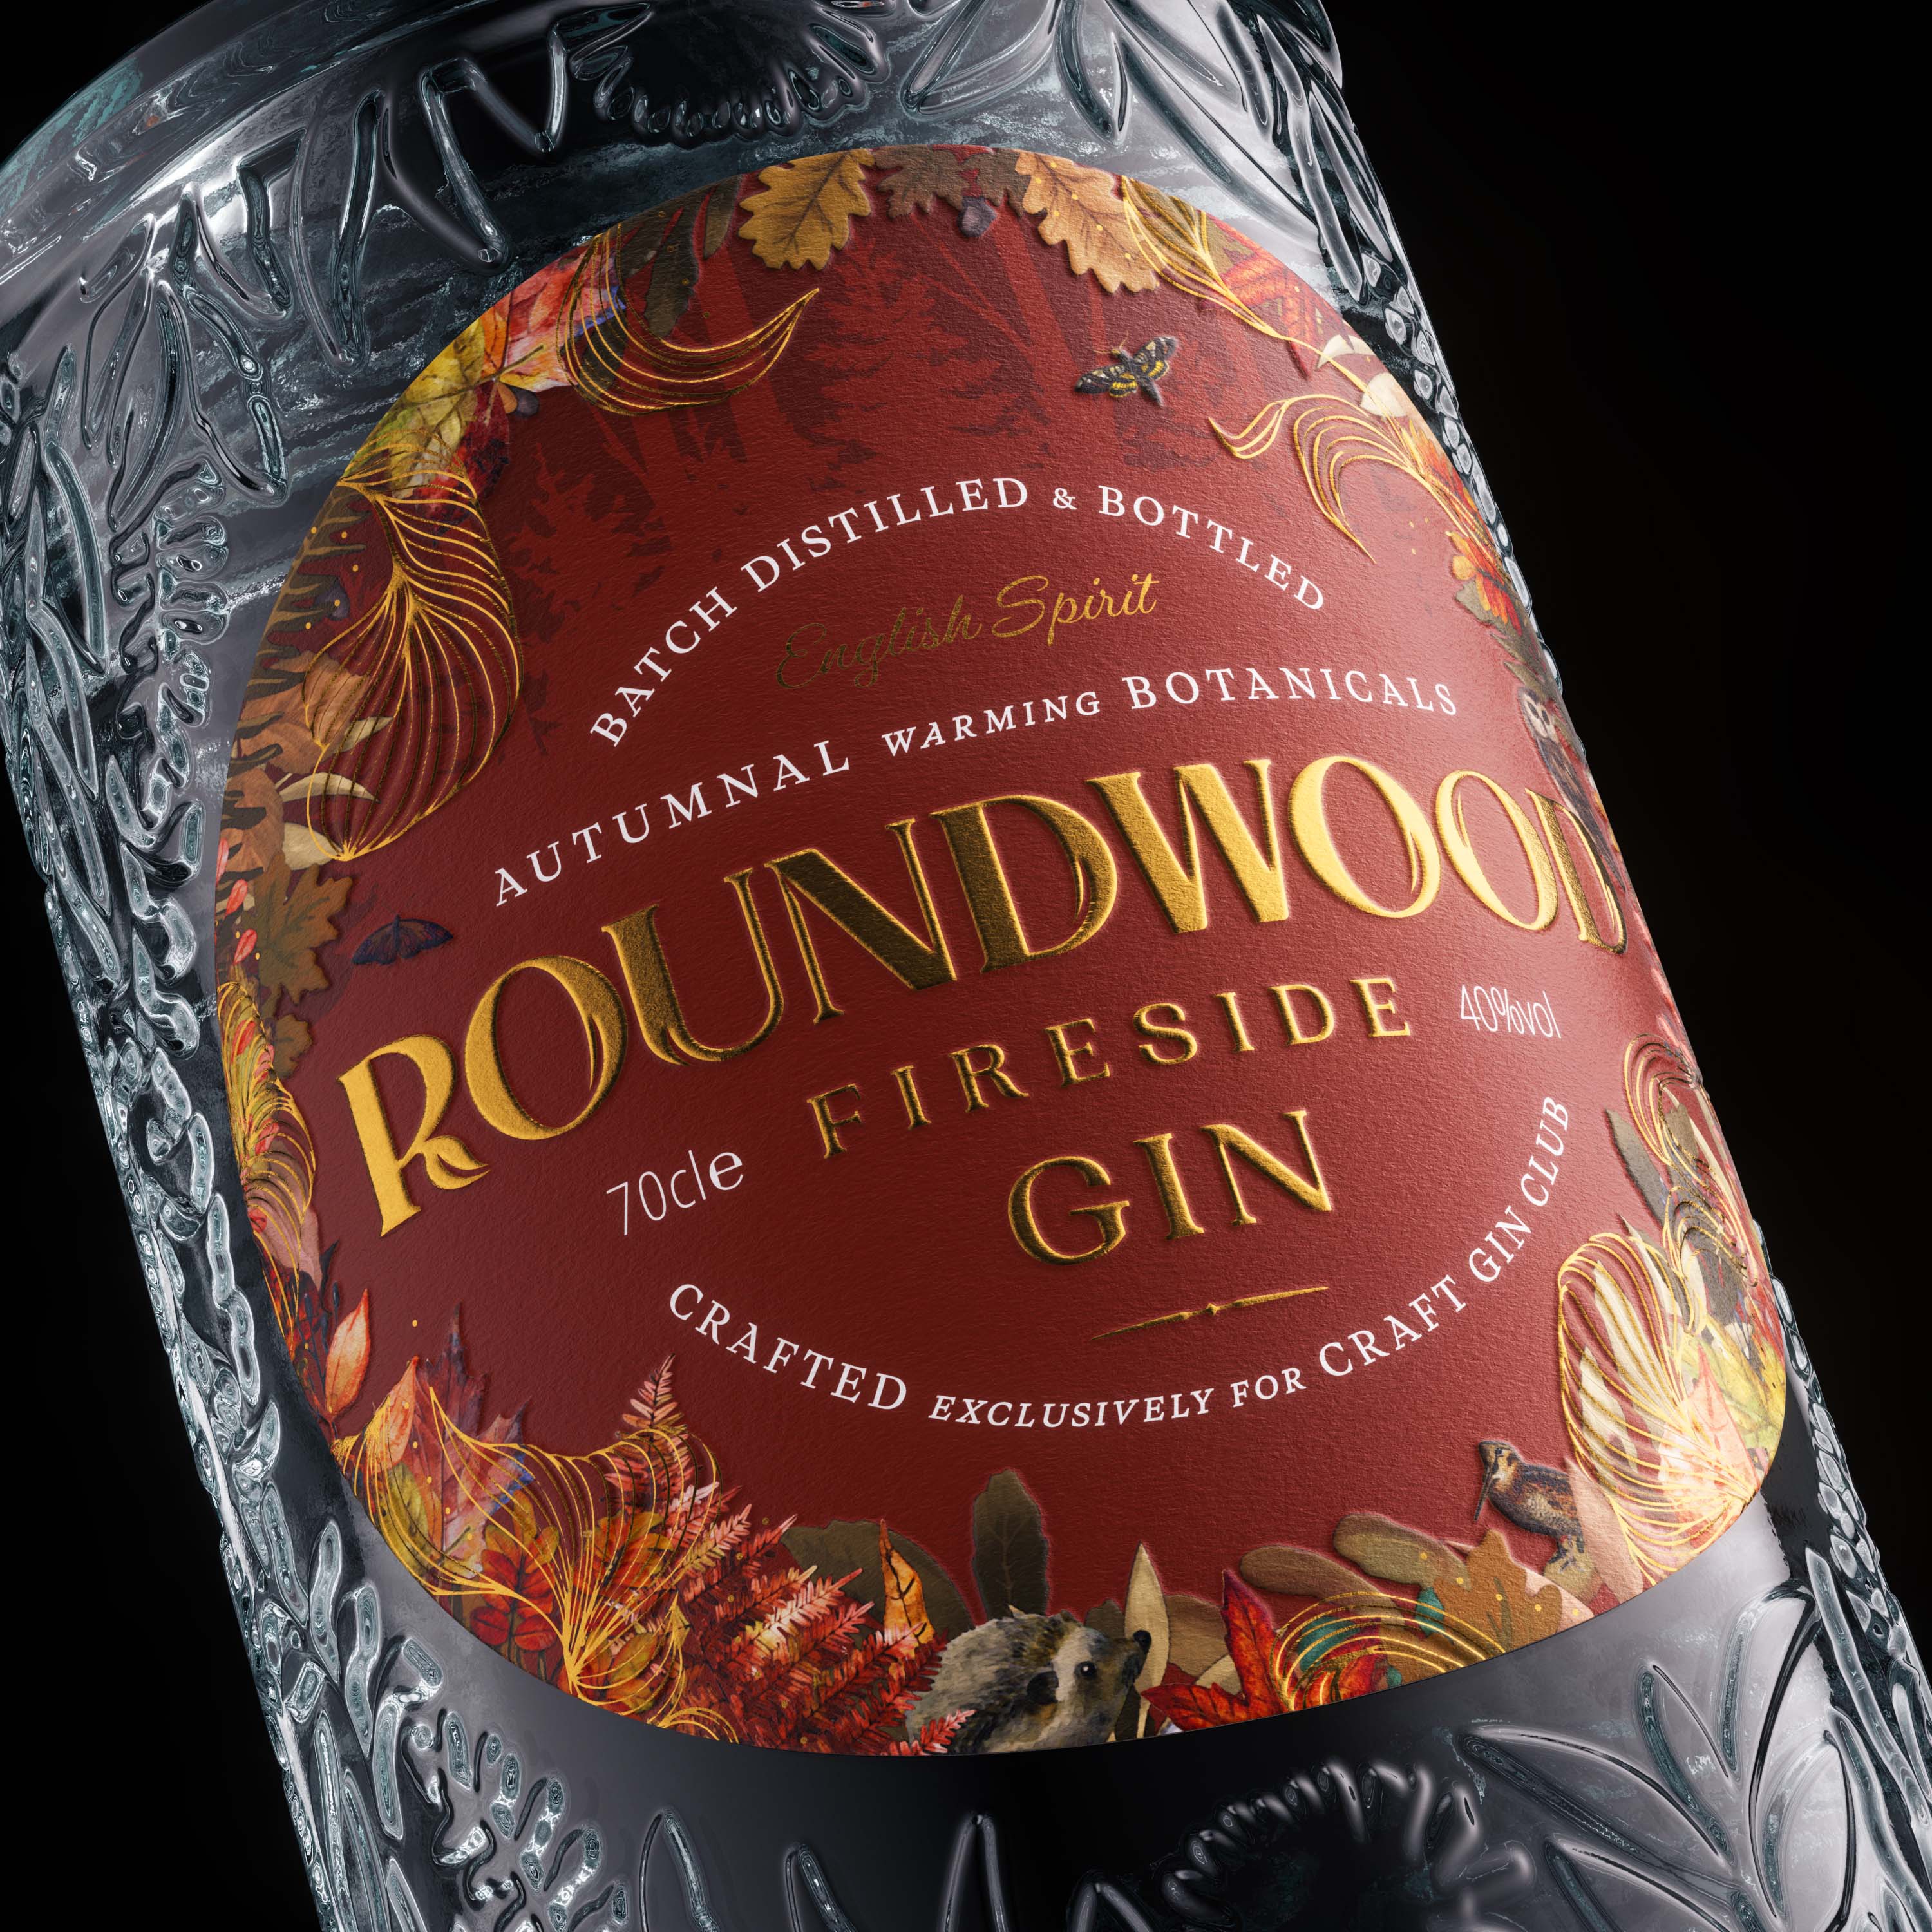 Benjamin Charles Studio Redefines Roundwood Fireside Gin with Brand and Bottle Design